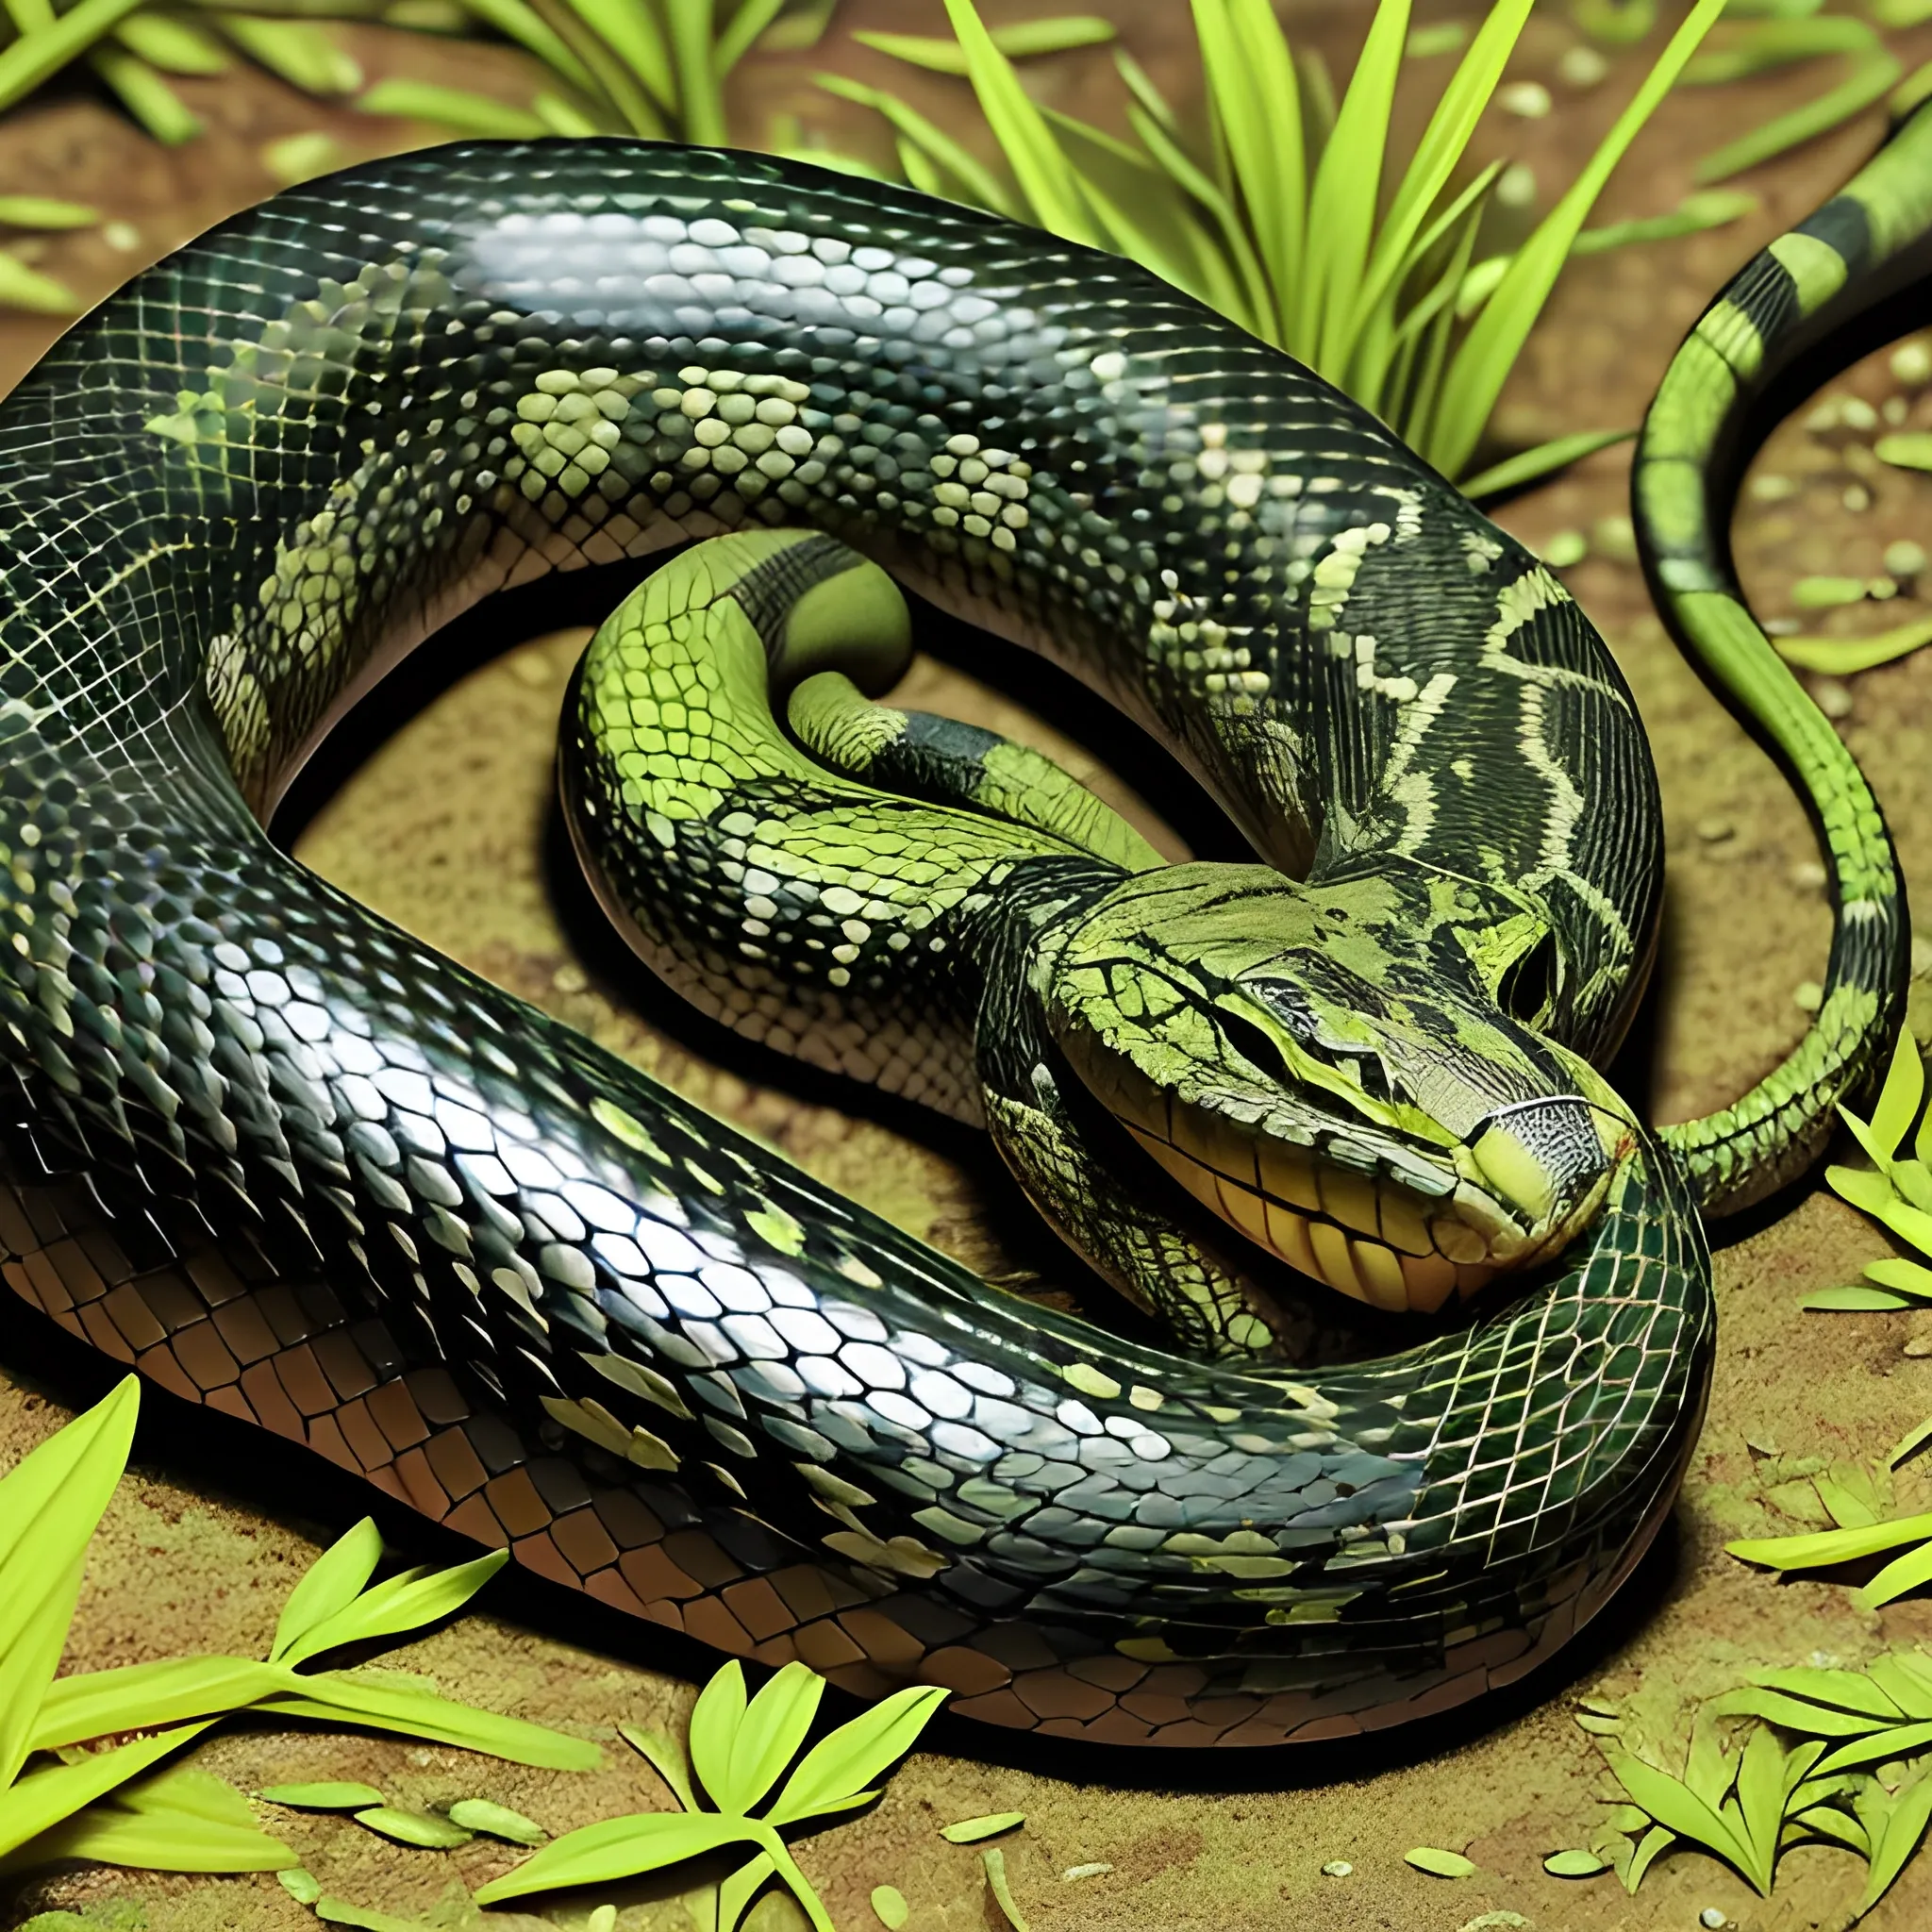 Appearance: The Poisonous Snake is a small to medium-sized reptile with a slender body and a distinctive pattern of scales. Its colors can vary widely, from vibrant and striking patterns to more muted earth tones, helping it blend into its natural surroundings. The snake's head is triangular, and it has a pair of fangs at the front of its mouth, through which it delivers its venom.

Features: The Poisonous Snake is known for its venomous bite, which it uses to incapacitate its prey and defend itself from threats. Its venom can vary in potency, from causing mild discomfort to being deadly, depending on the species. While not as powerful as the venom of more dangerous creatures, the Poisonous Snake's bite can still cause considerable harm to unwary adventurers.

Habitat: Poisonous Snakes can be found in a wide range of environments, from dense jungles and forests to dry deserts and grasslands. They are highly adaptable creatures and can thrive in various conditions, making them a common sight in untamed wilderness areas.

Behavior: The Poisonous Snake is a stealthy predator, relying on its camouflage and patience to ambush its prey. It strikes quickly and accurately, using its venom to immobilize and begin the process of consuming its victim. Poisonous Snakes are generally non-aggressive towards larger creatures, preferring to flee rather than confront a potential threat.

Role in the World: In your DND world, Poisonous Snakes could serve as common dangers in the wild, particularly in regions where adventurers explore untamed territories. Druids and rangers might have a connection with these creatures, viewing them as part of the natural balance.

Encountering a Poisonous Snake in the wild can be a common and potentially hazardous event for adventurers. While they are generally not aggressive, they may strike if they feel threatened or cornered. Players might need to exercise caution and use skills such as animal handling or survival to avoid confrontations with these venomous reptiles. If adventurers do find themselves bitten, they must act quickly to counteract the effects of the venom and avoid more serious consequences.

The presence of Poisonous Snakes in your campaign adds an element of realism and danger to the wilderness. Players will need to be vigilant and watchful during their travels, as the risk of encountering these venomous creatures is ever-present. Poisonous Snakes can also serve as a minor but meaningful challenge, especially for lower-level adventurers, teaching them the importance of preparation and awareness in the untamed wilderness.